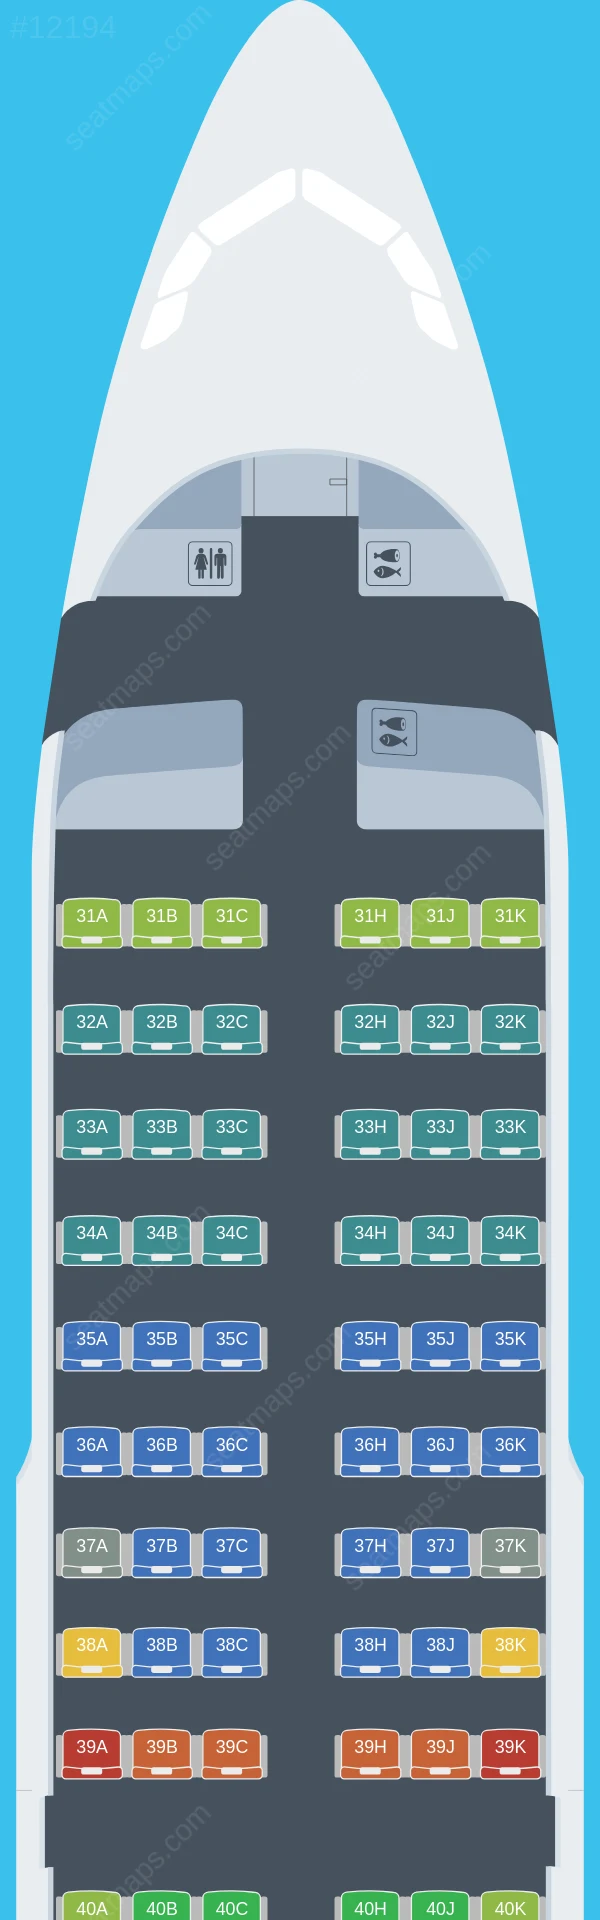 Chongqing Airlines Airbus A319-100 seatmap preview